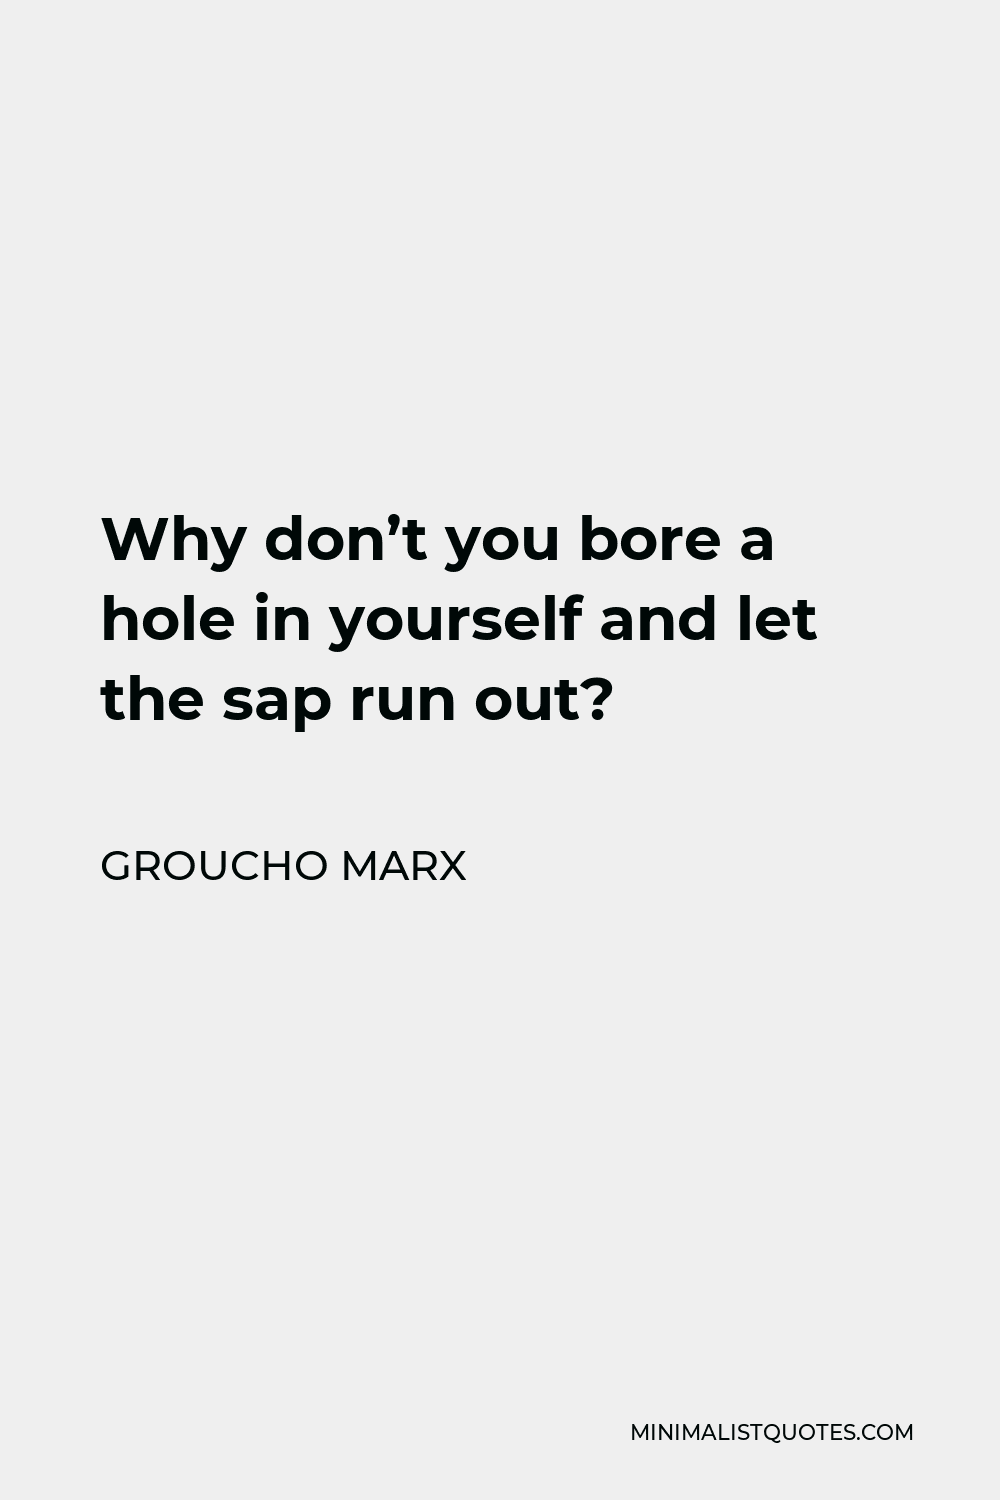 Groucho Marx Quote - Why don’t you bore a hole in yourself and let the sap run out?